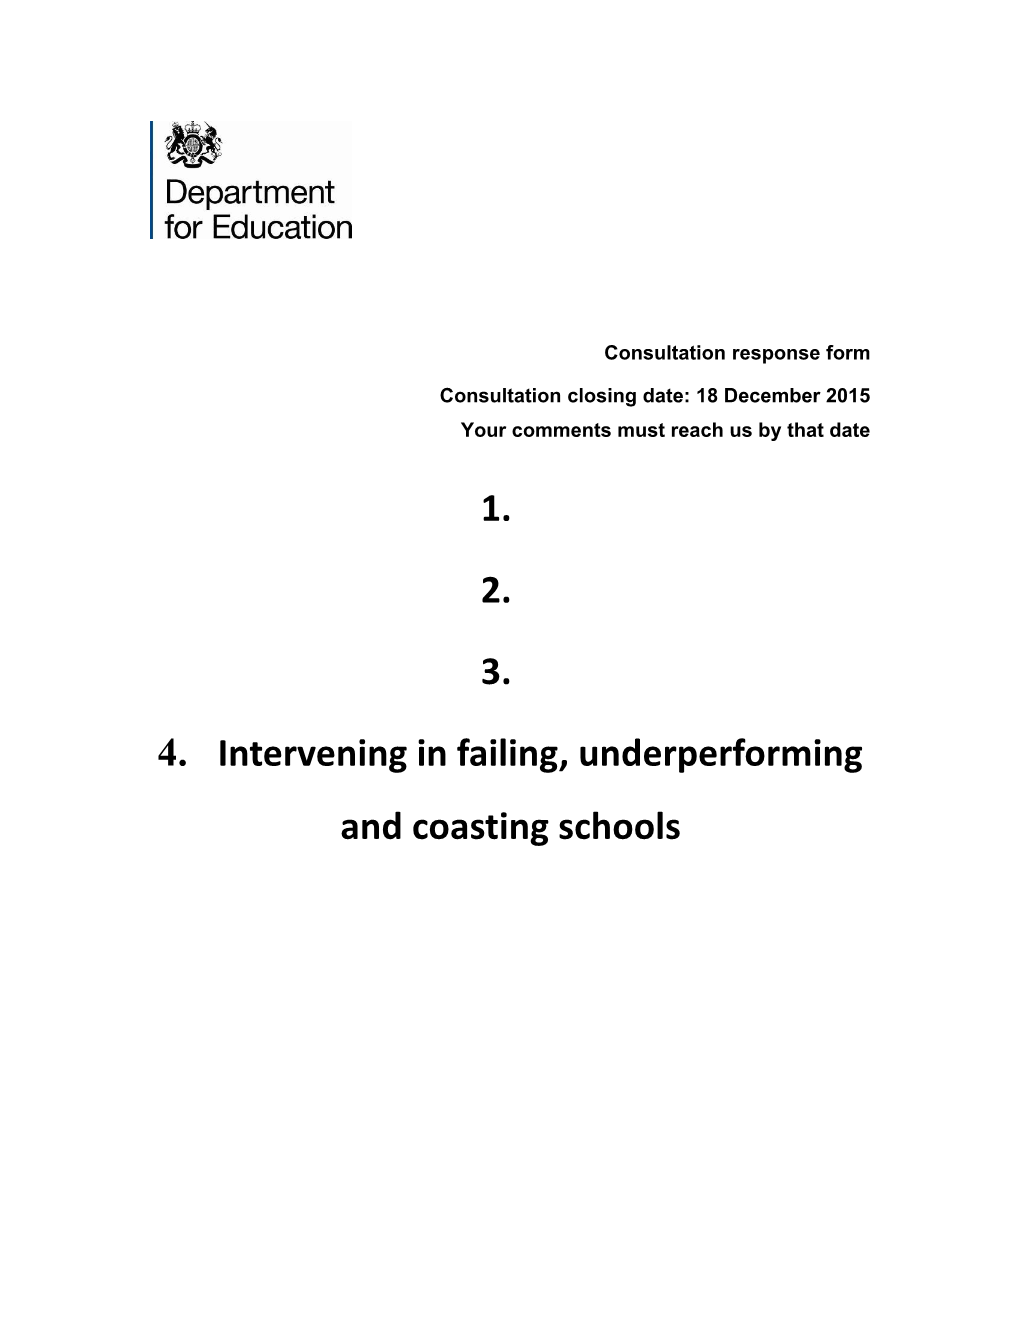 Intervening in Failing, Underperforming and Coasting Schools